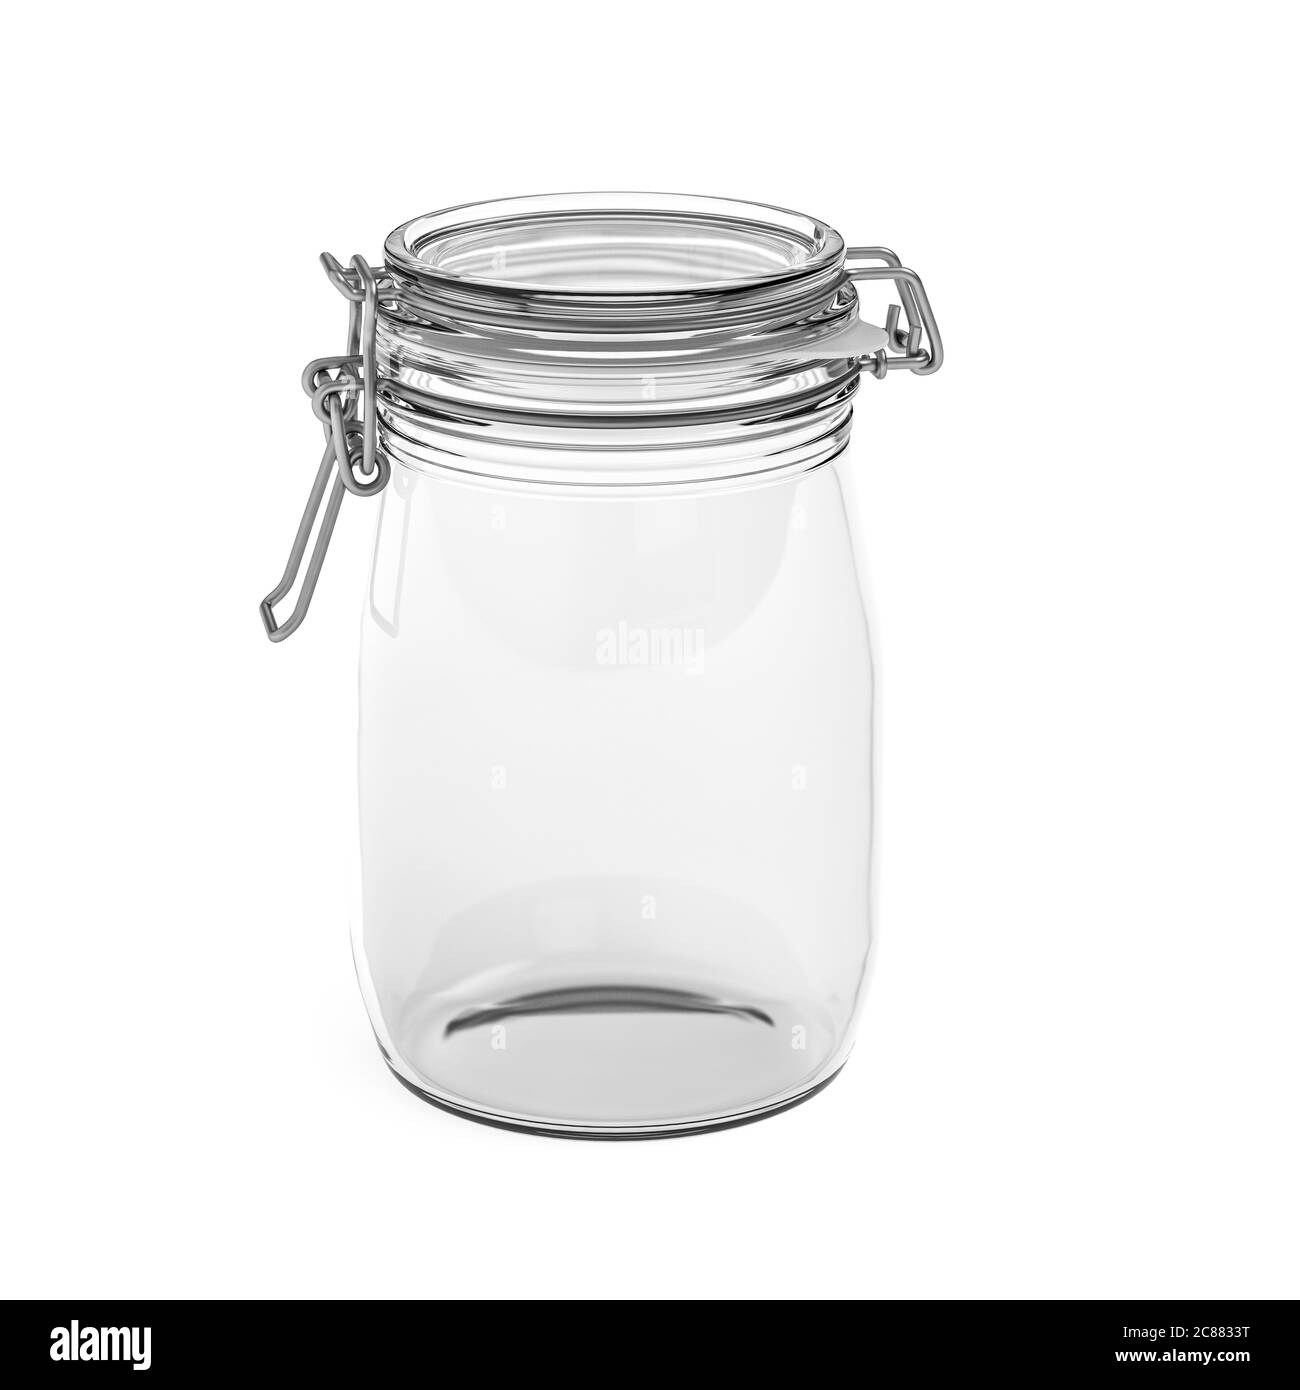 https://c8.alamy.com/comp/2C8833T/empty-round-glass-jar-isolated-on-white-background-3d-render-2C8833T.jpg